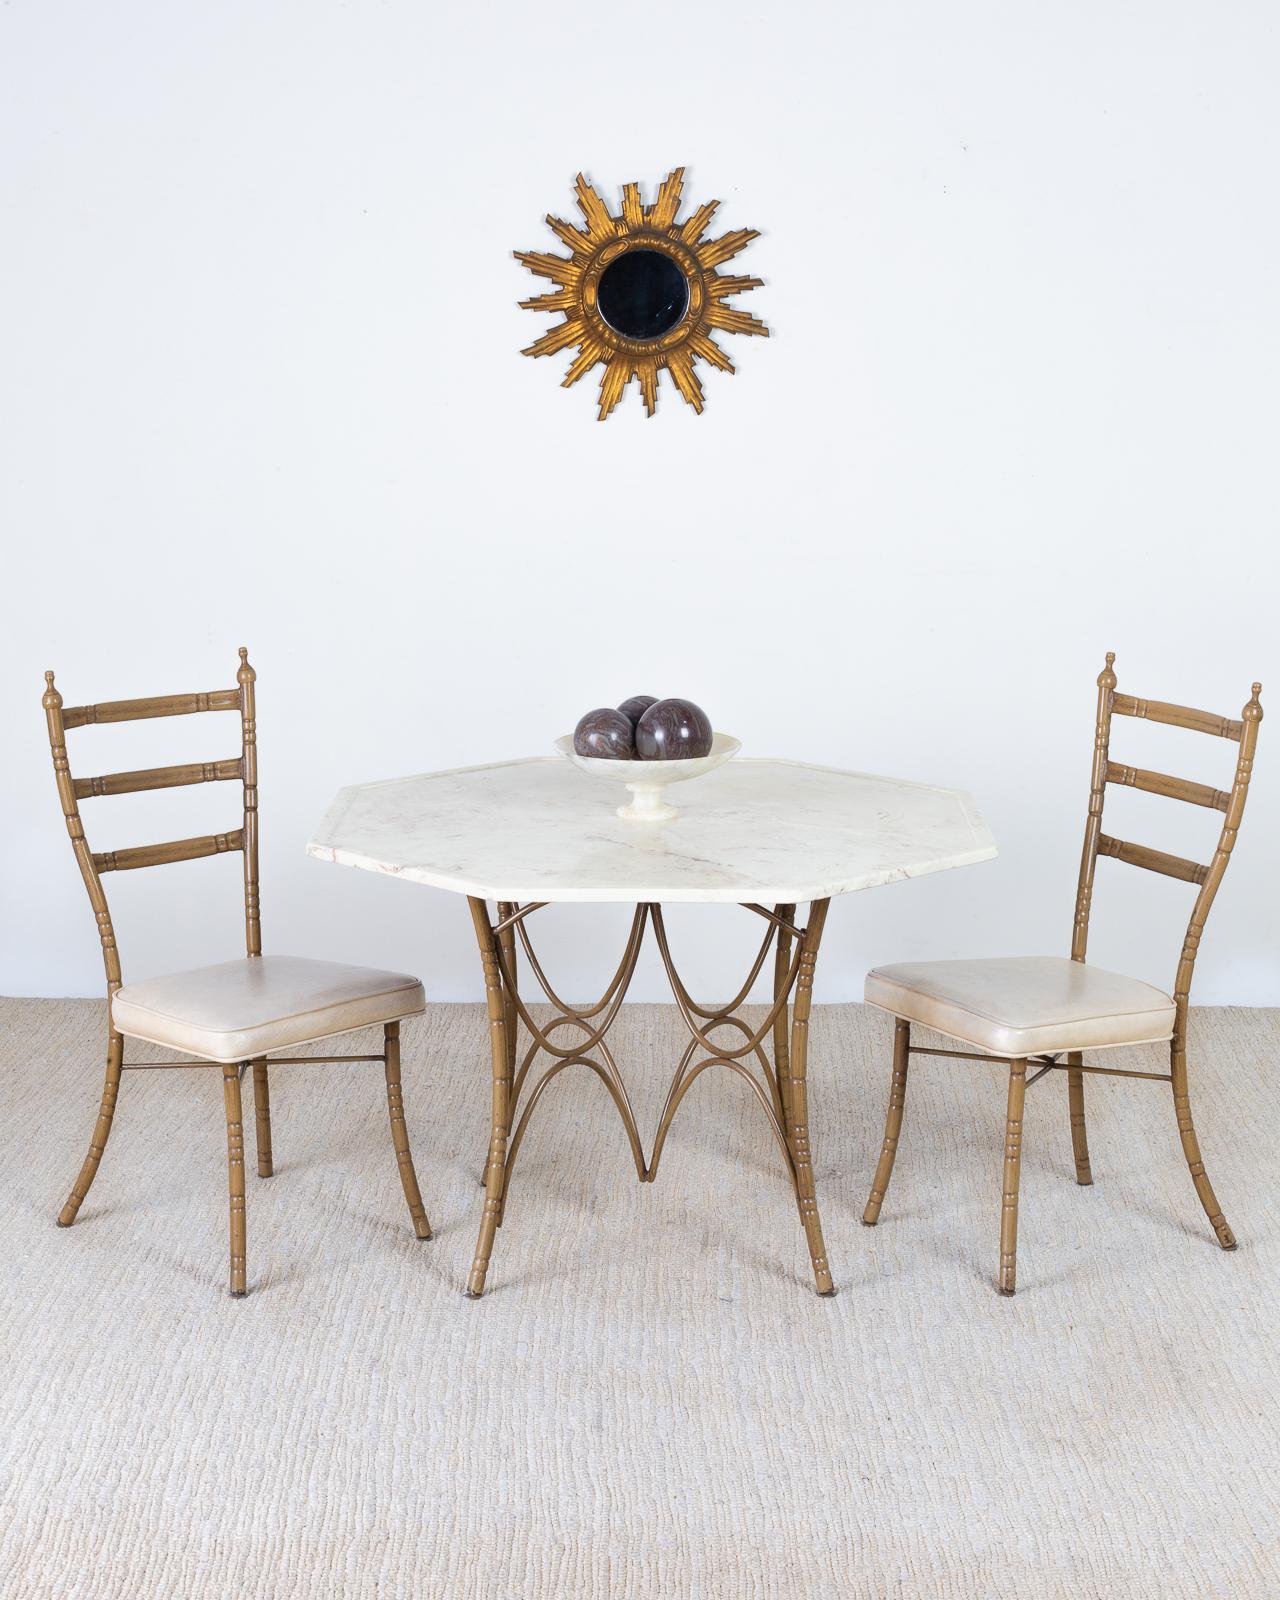 Gorgeous Italian Mid-Century Modern dining table featuring an octagonal marble top. The unique table has a faux bamboo iron base with a painted finish. The curved legs are conjoined by multiple curved stretchers in a star form at the center. The